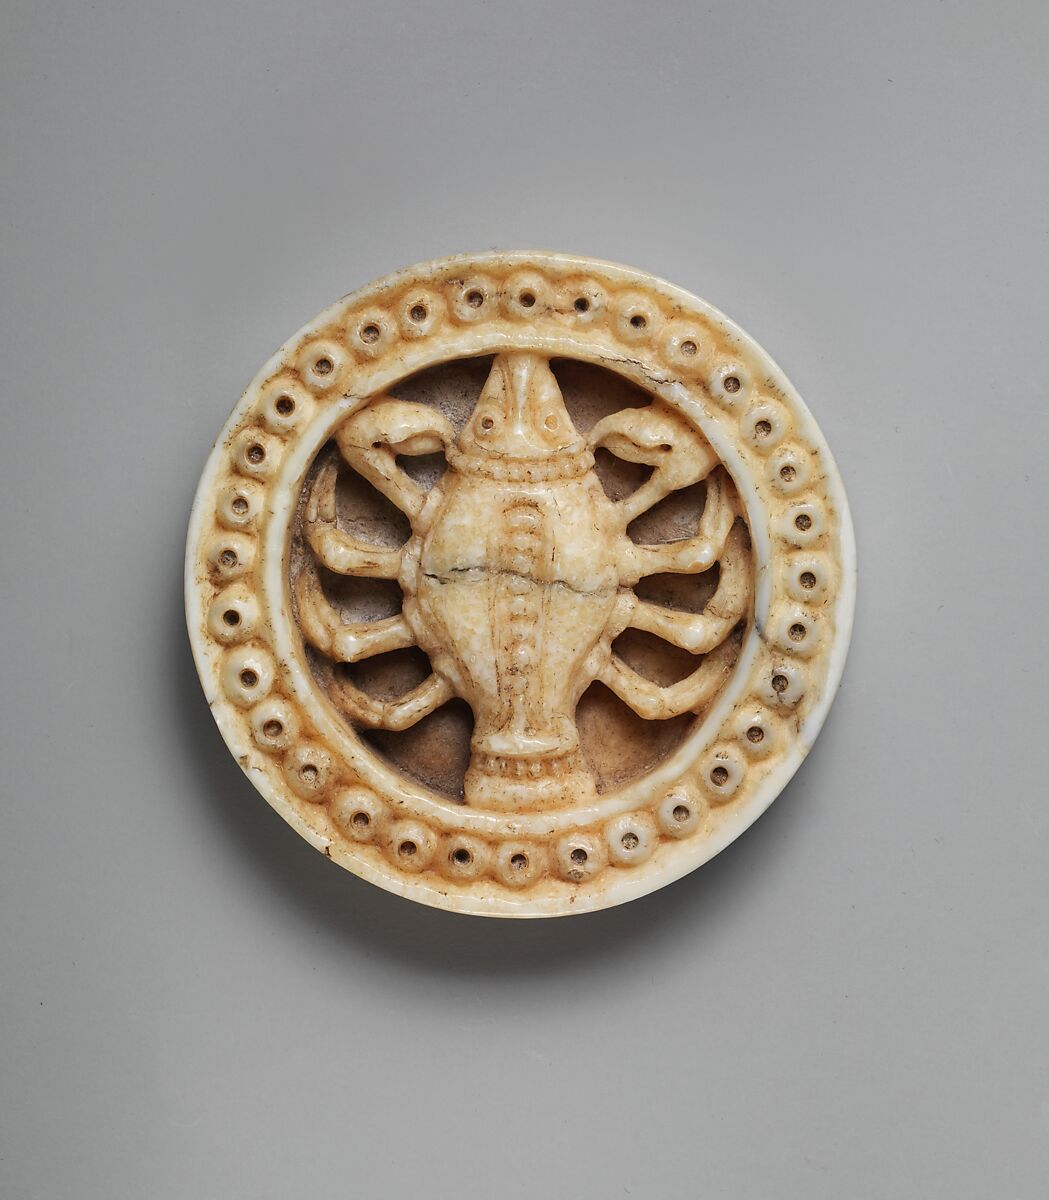 Game Piece with Zodiac Sign of Cancer or Scorpio, Walrus ivory, North French 